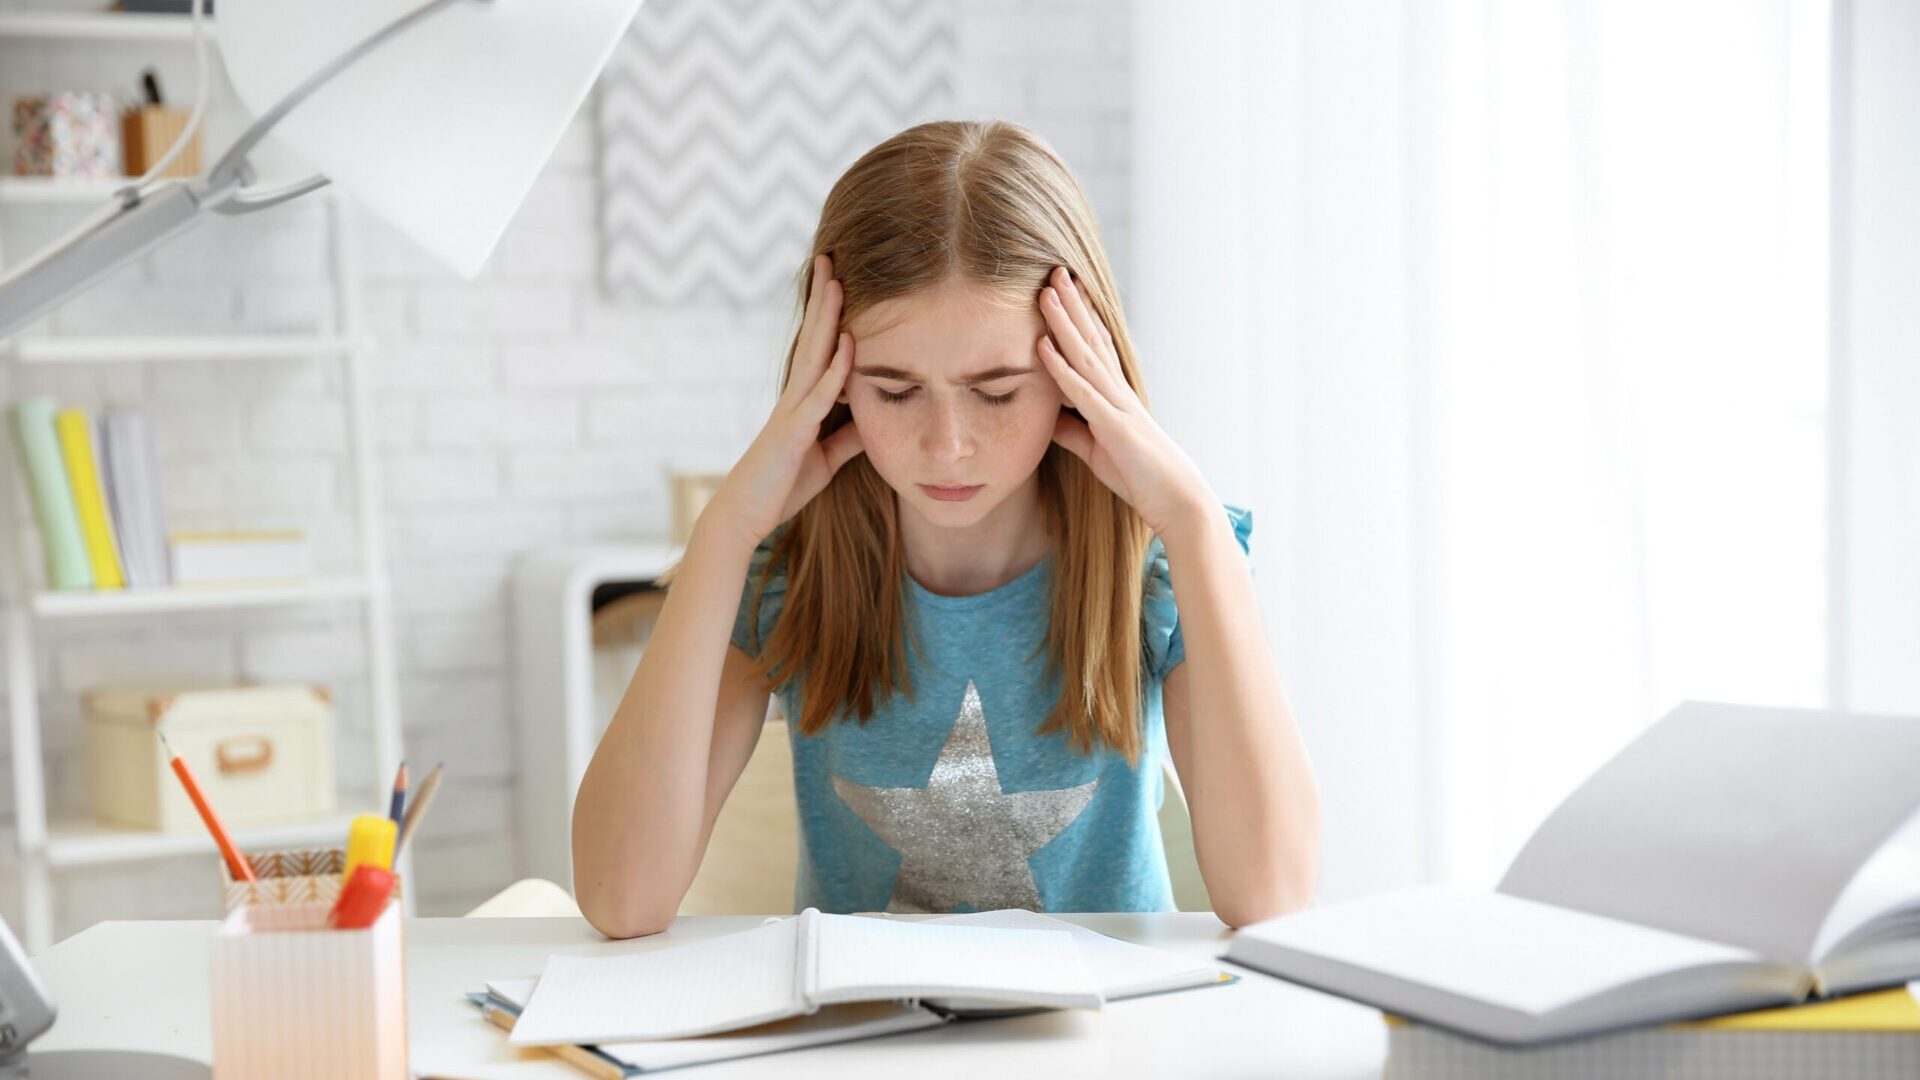 Teenage,Girl,Suffering,From,Headache,While,Doing,Homework,At,Table